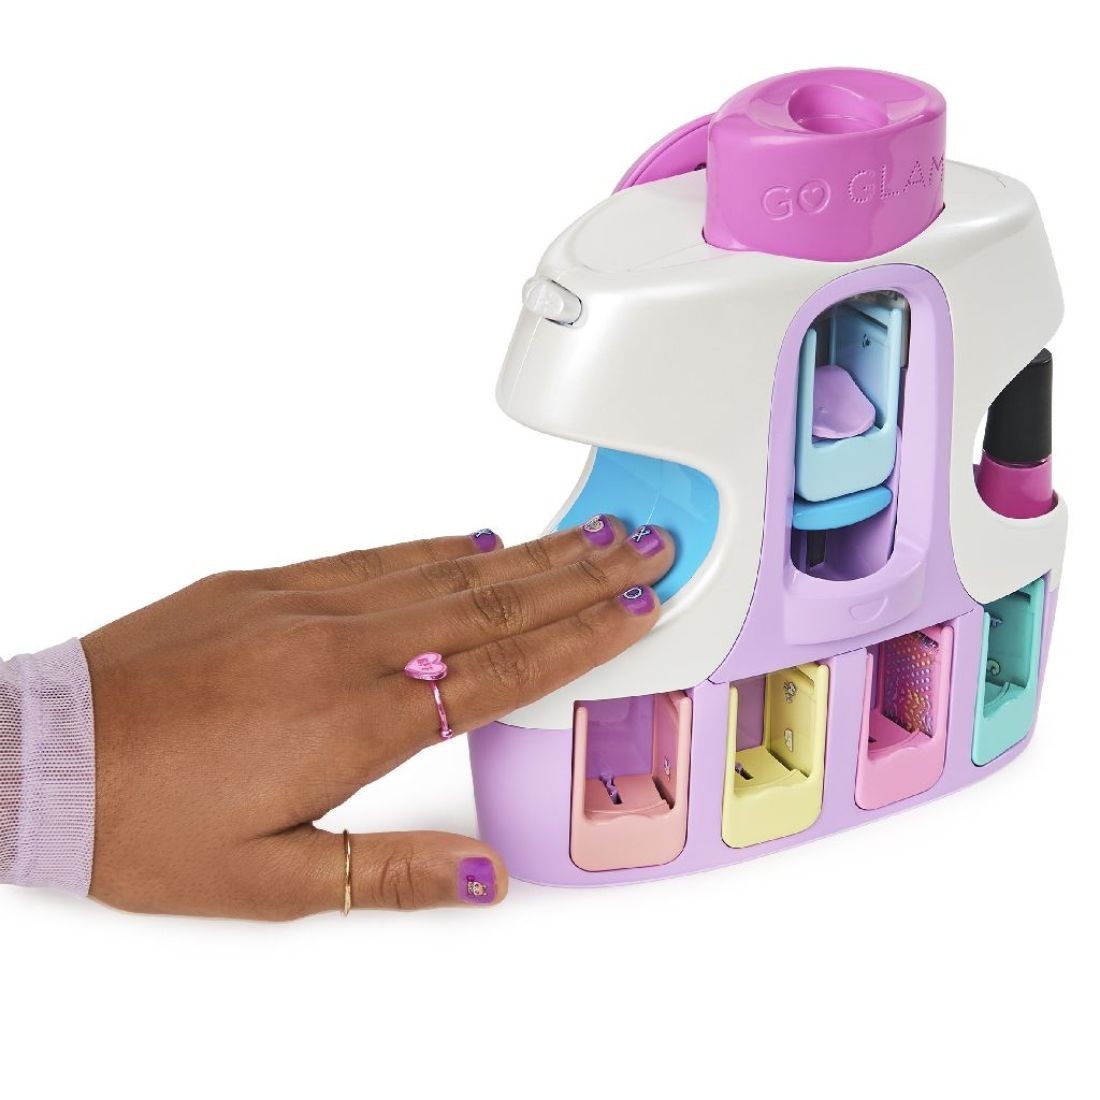 Cool maker - go glam nail surprise (assort) (barquette) Spin Master